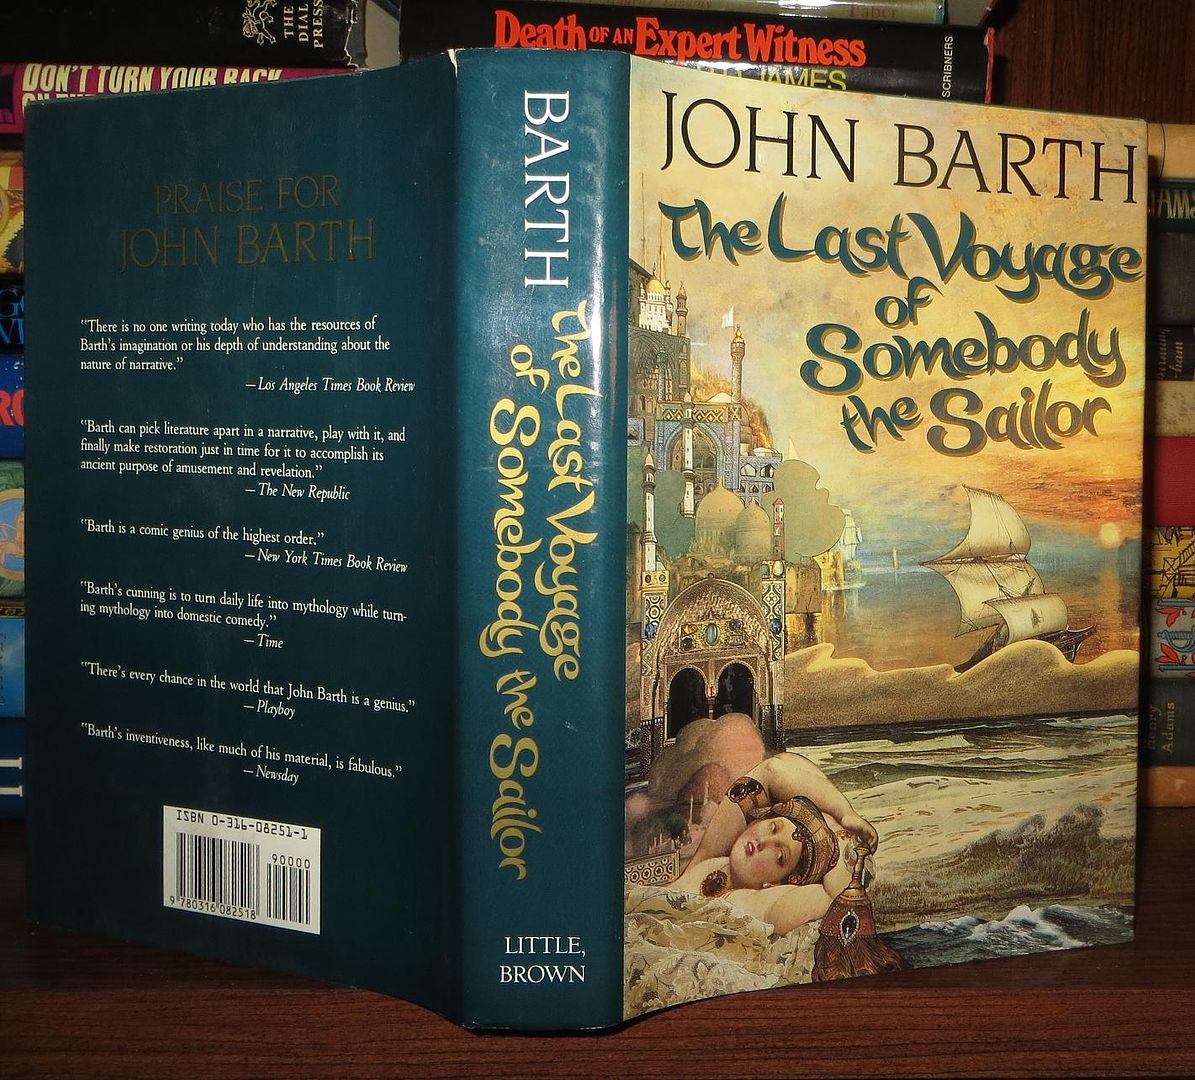 BARTH, JOHN - The Last Voyage of Somebody the Sailor